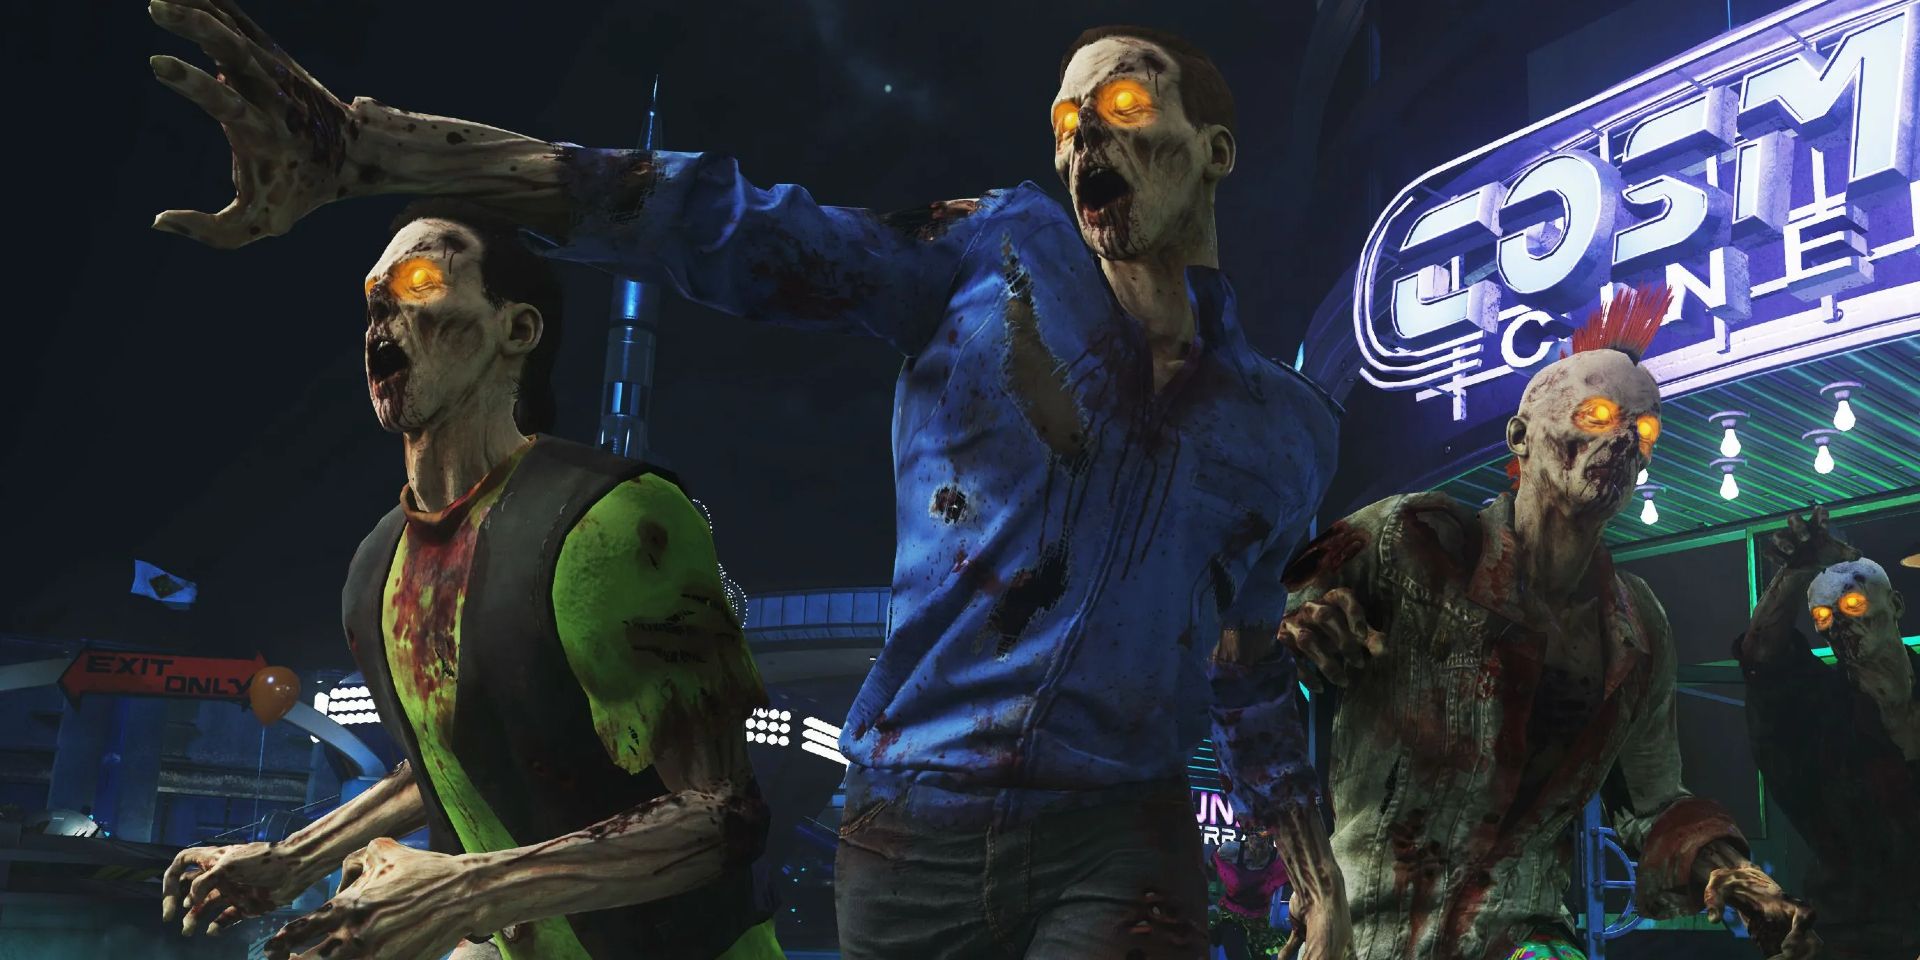 Zombies in an amusement park in the video game Call of Duty: Infinite Warfare.